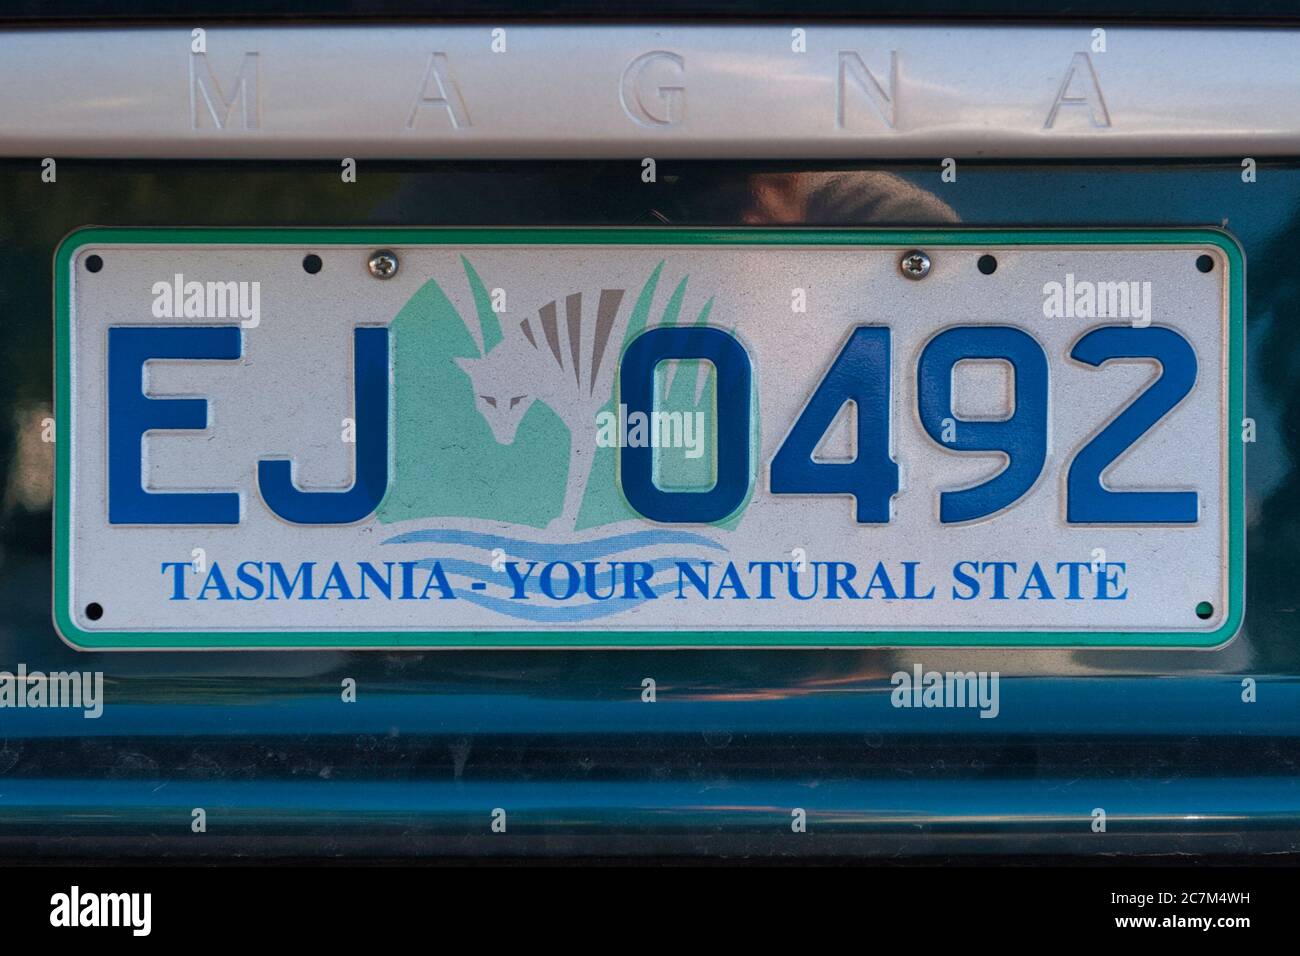 Close up of a vehicle number plate with the slogan saying Tasmania-Your Natural State, under the license numbers. Hobart, Tasmania, Australia. Stock Photo